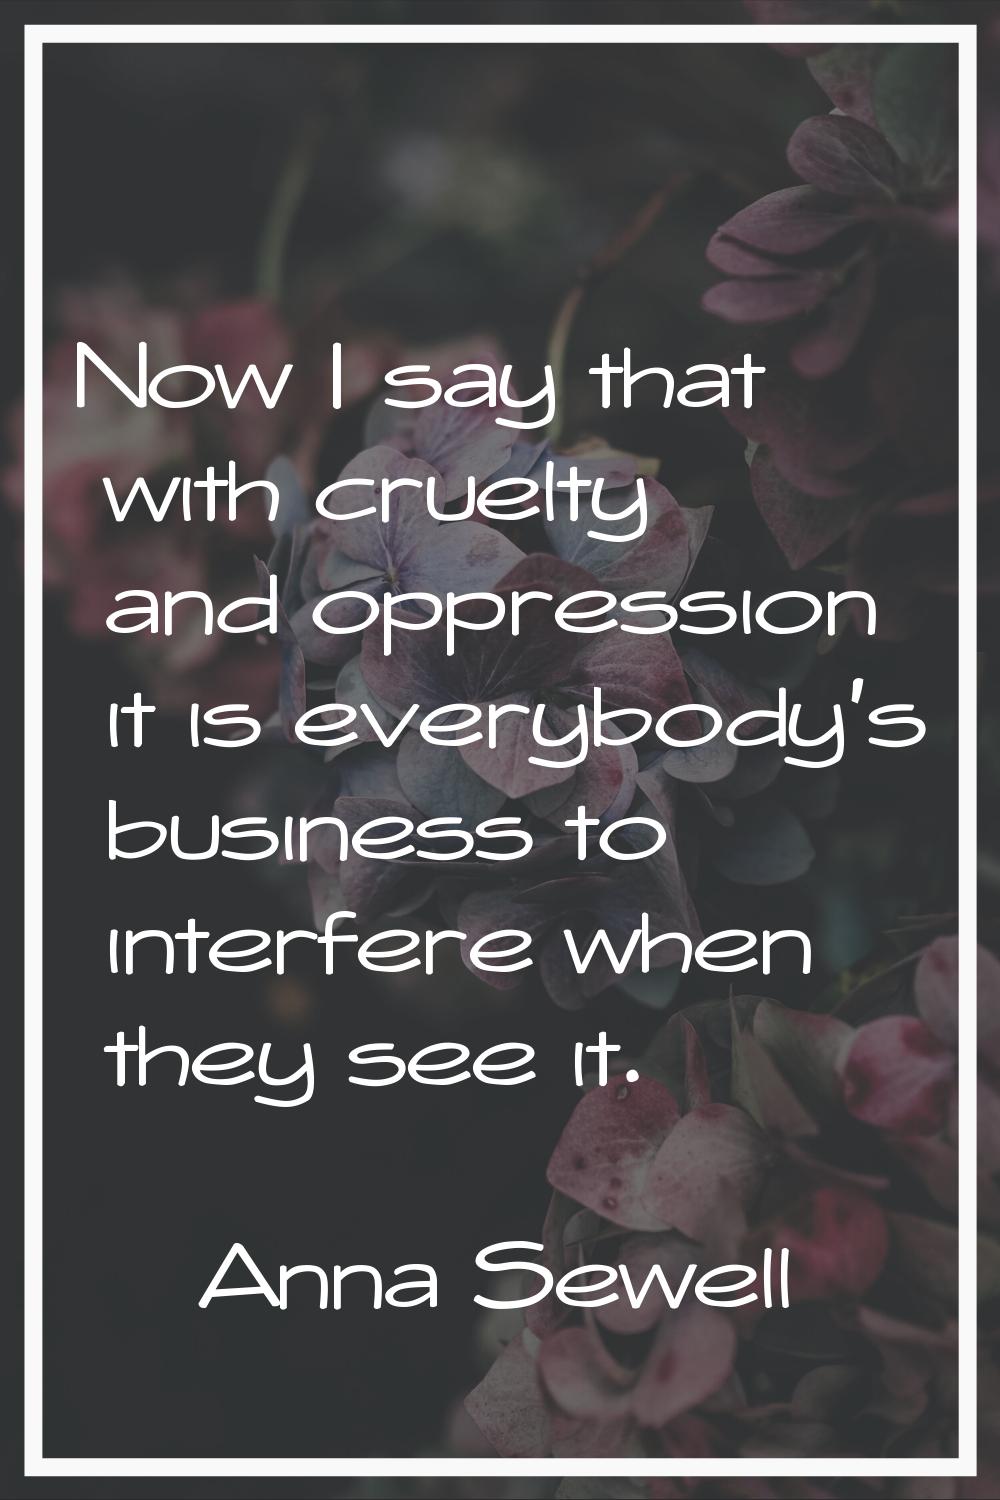 Now I say that with cruelty and oppression it is everybody's business to interfere when they see it